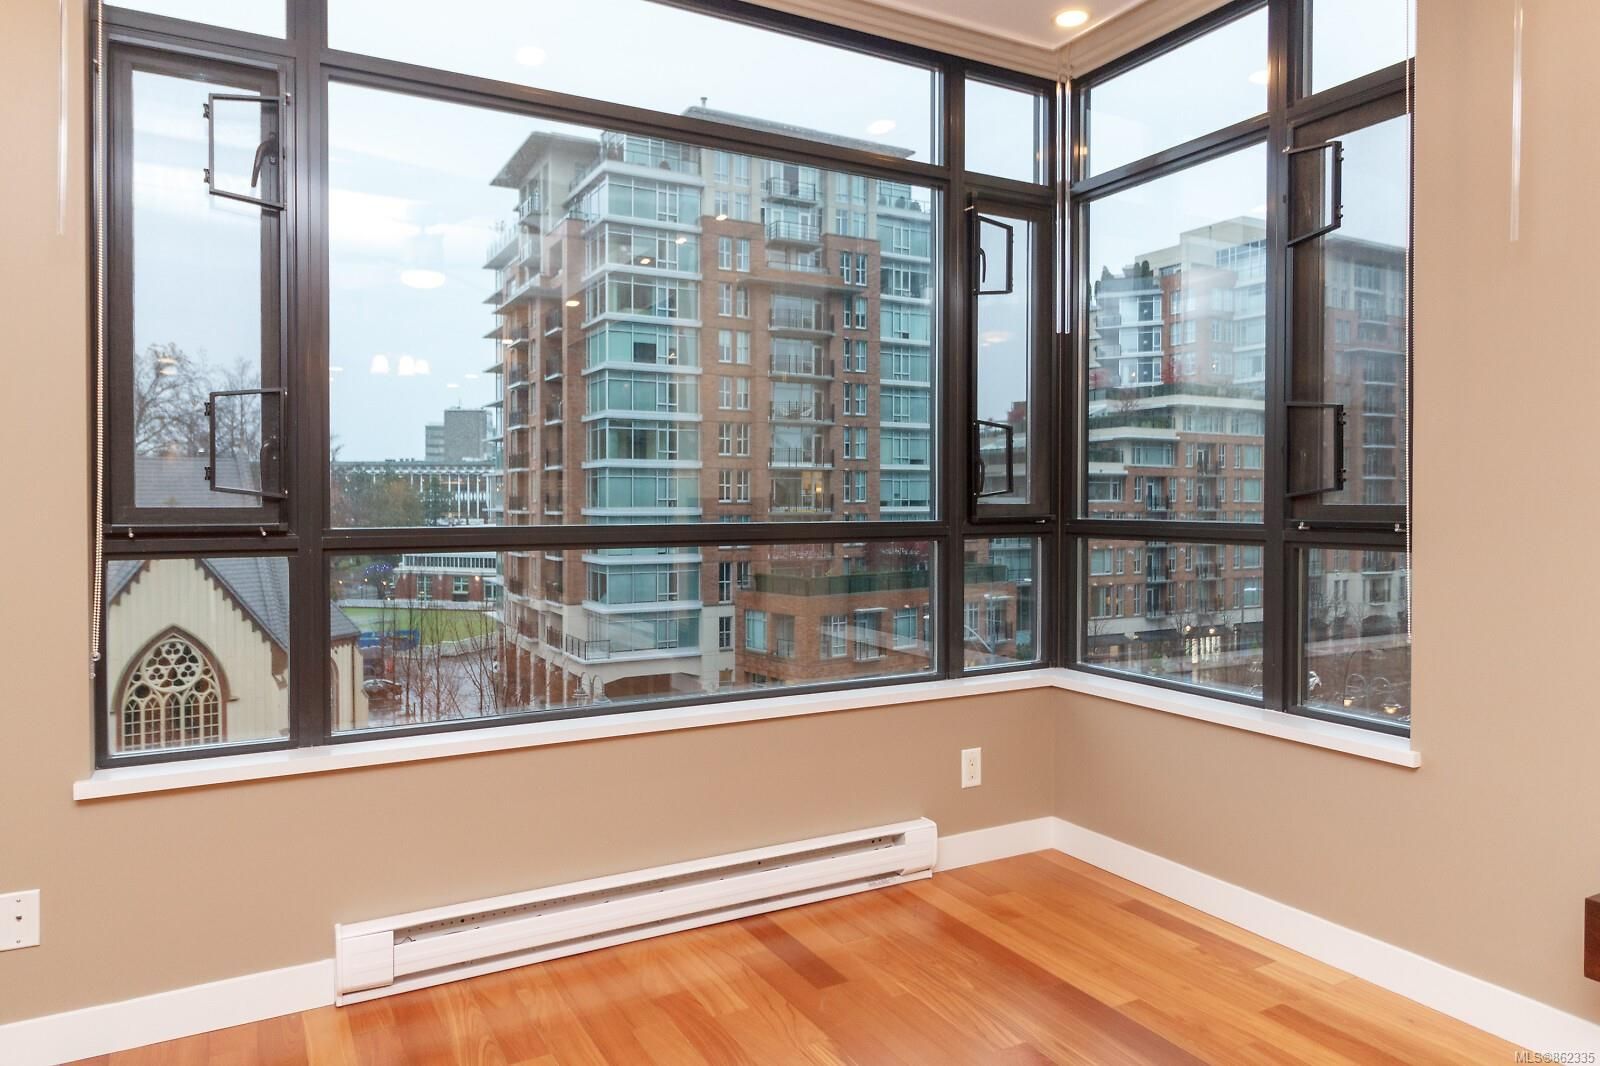 Photo 5: Photos: 406 788 Humboldt St in Victoria: Vi Downtown Condo for sale : MLS®# 862335